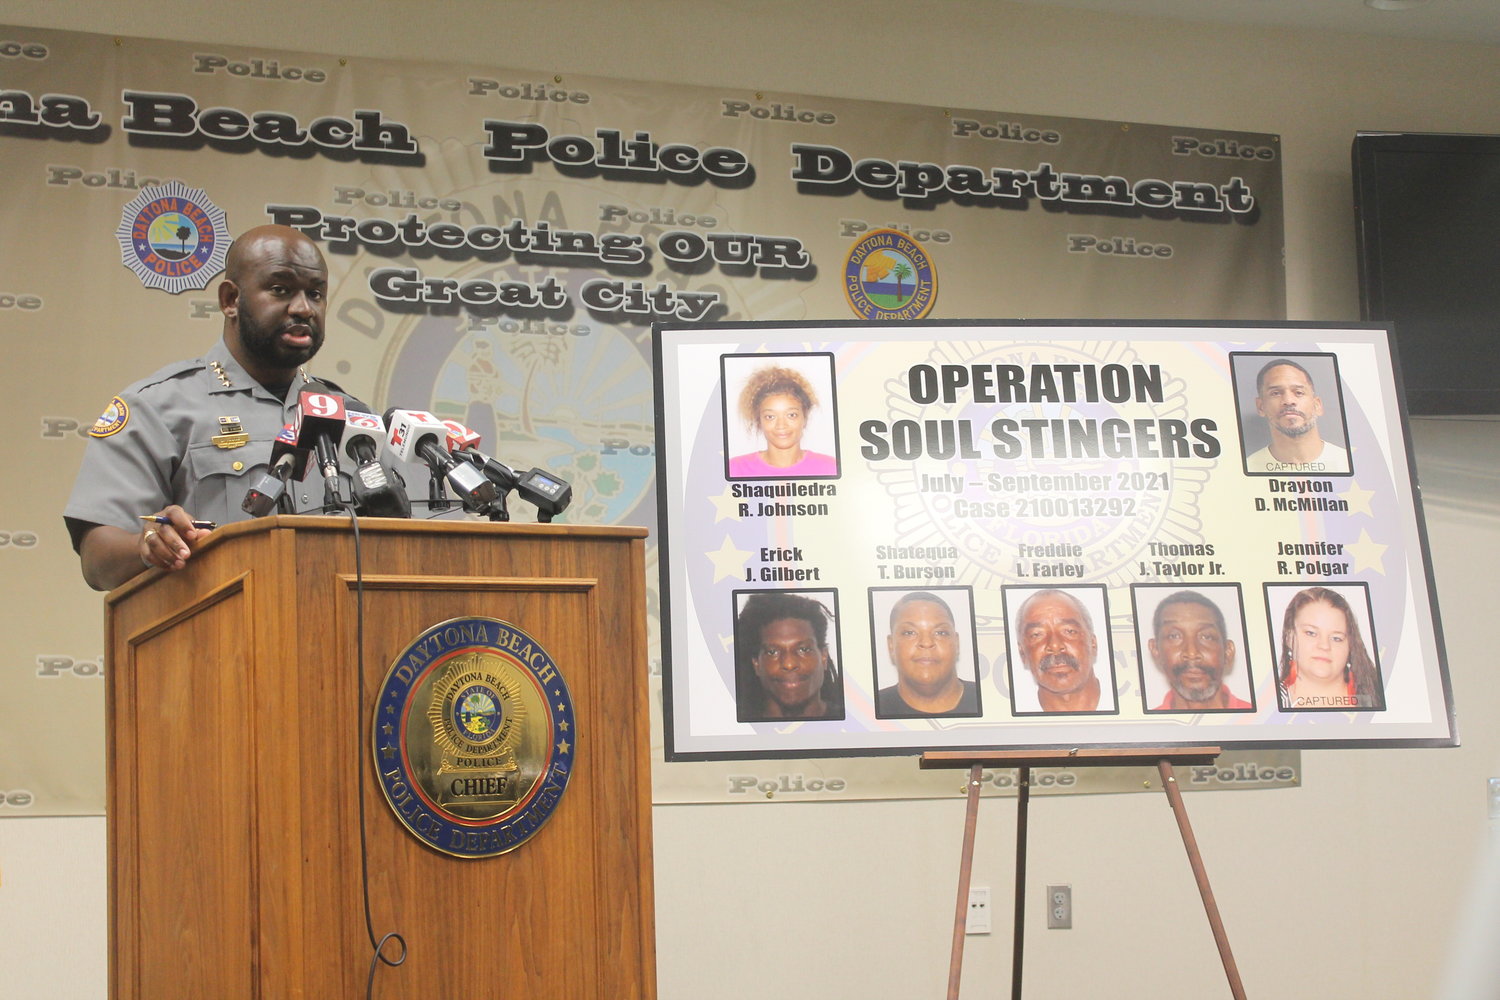 Daytona Beach Police Chief Jakari Young at a press conference discussing an operation that has charged 7 individuals with identity theft and fraud